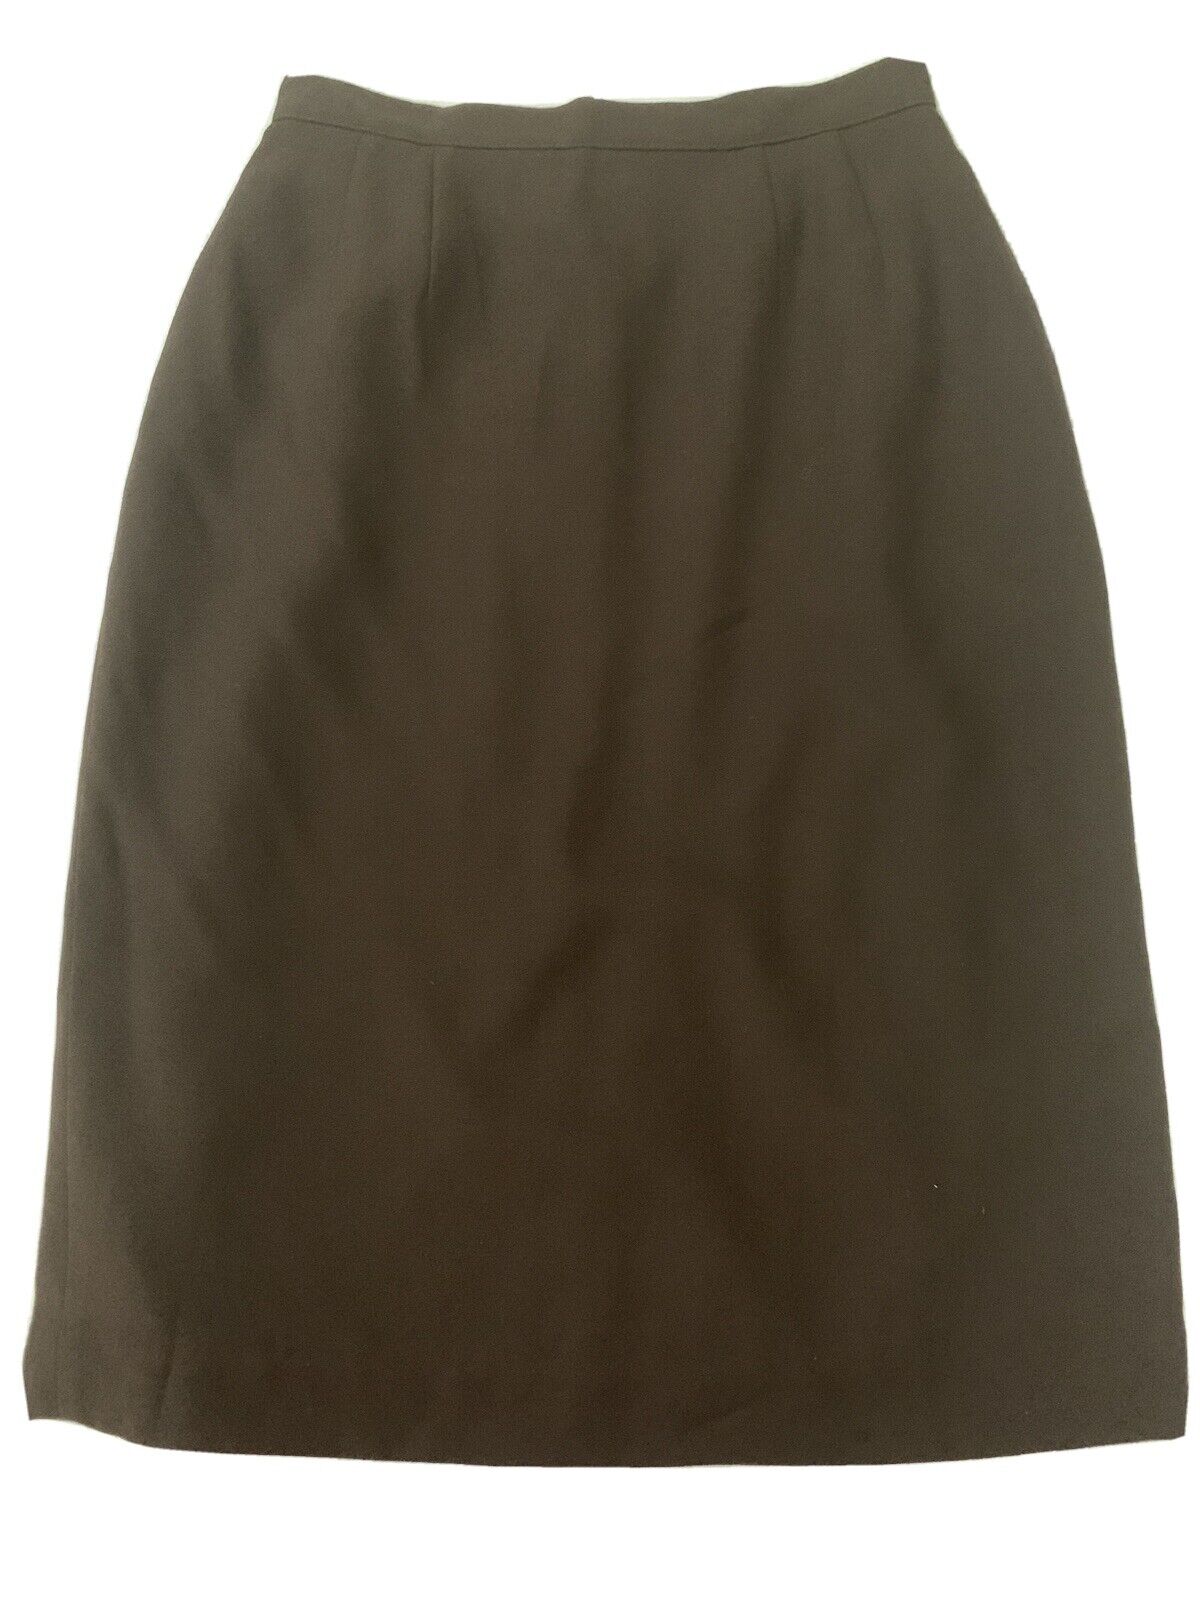 Vintage Dark Brown Lined Pencil Skirt Size 4 Rayon/Polyester Excellent Cond